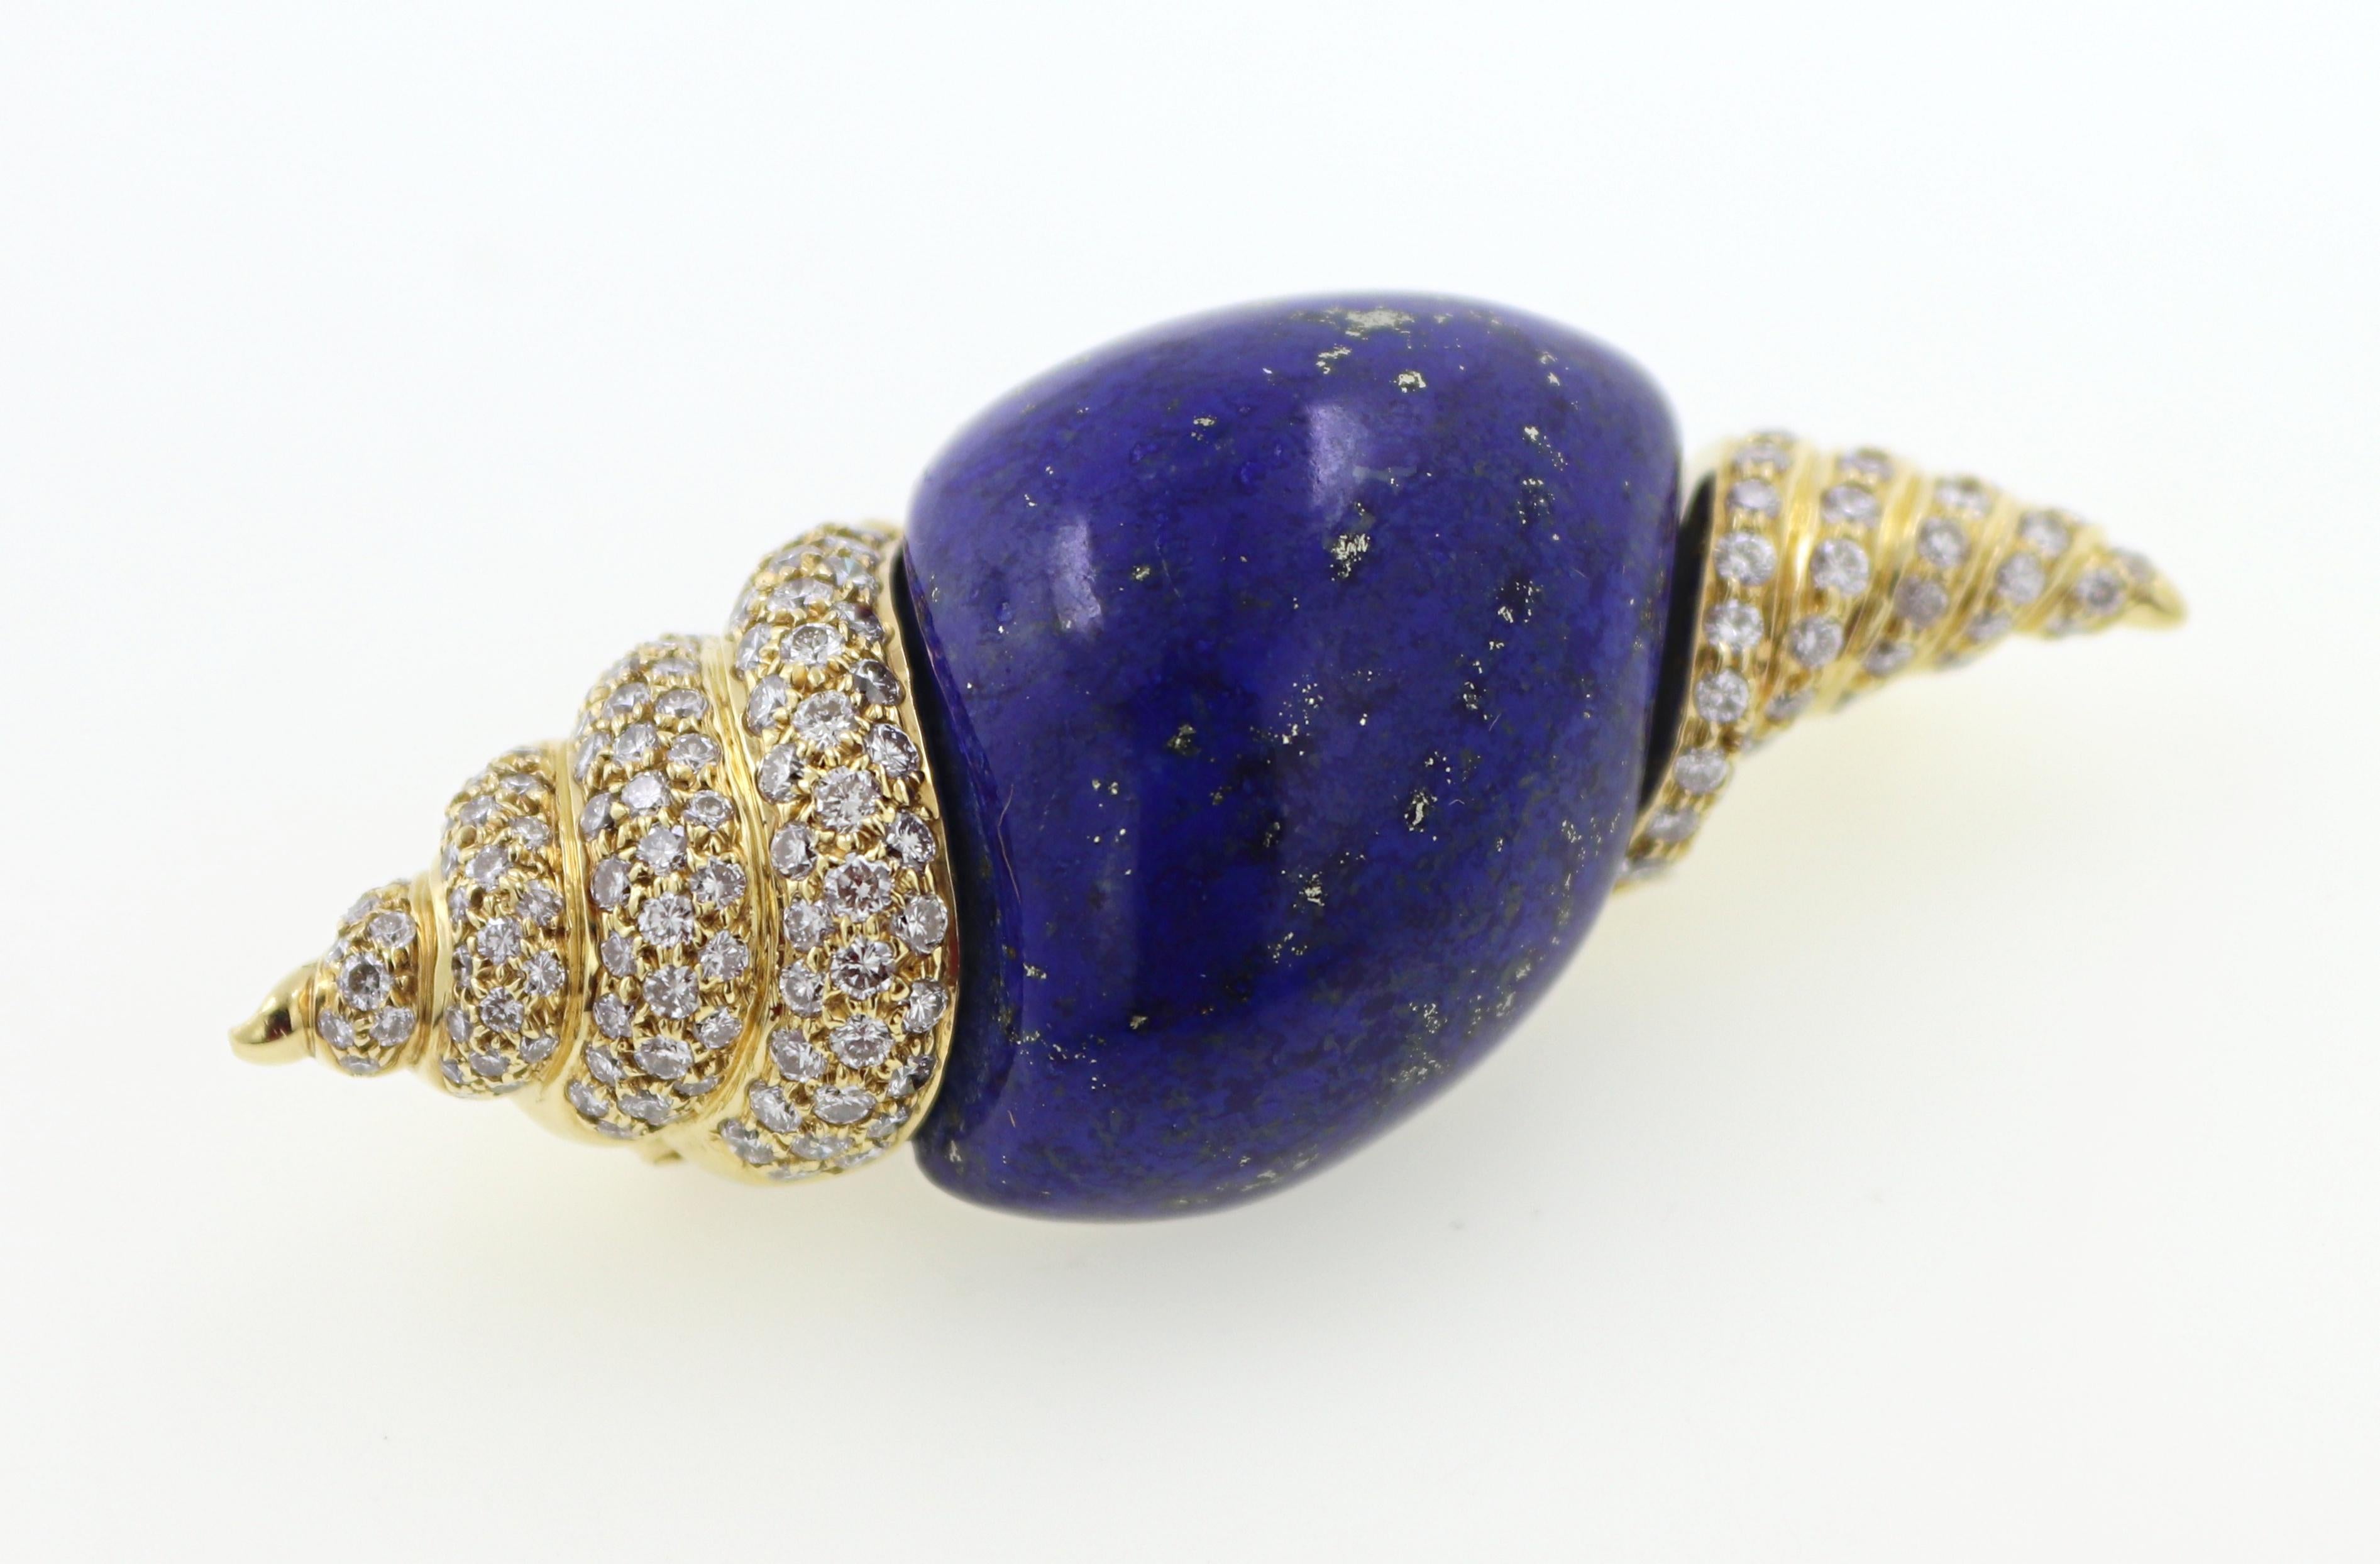 Featuring a carved lapis lazuli center, accented by 134 full-cut diamonds, 2.00  carat total weight, VS, I-J, pave set
in an 18k yellow gold seashell mounting, 53.23 X 22.9 X 17.3 mm, marked RNR, English hallmarks gold,
750, London, 1990, Gross